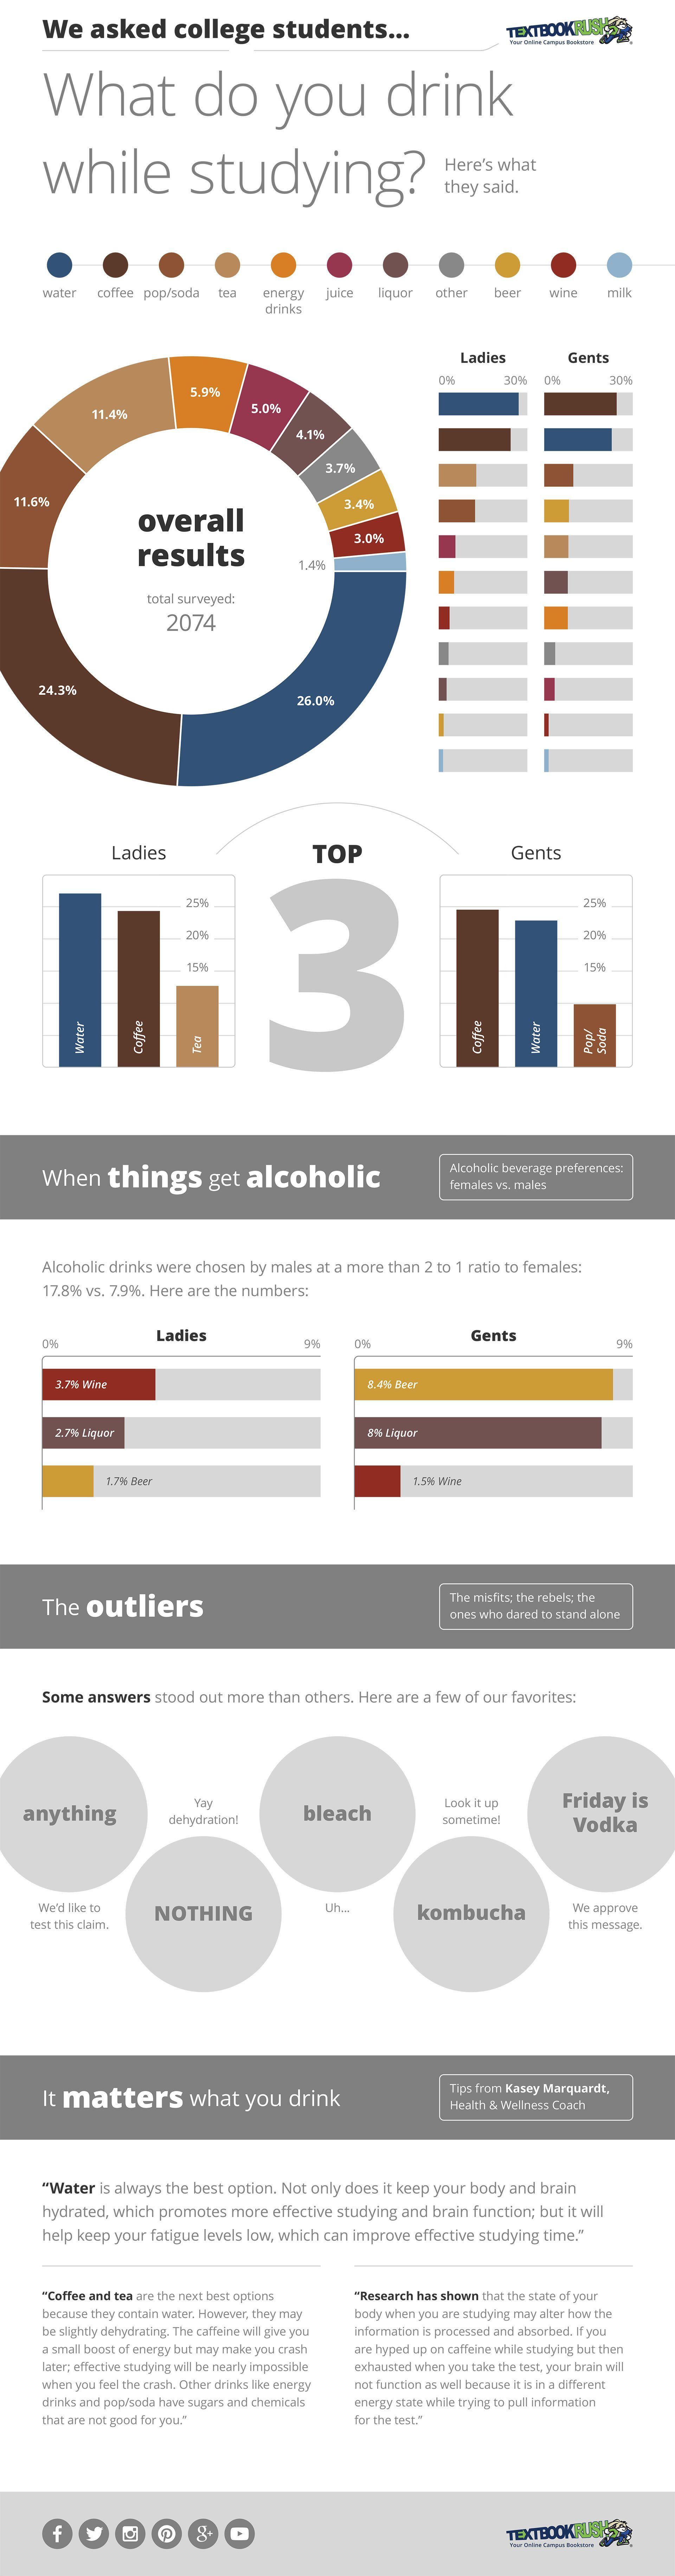 What College Students Drink While Studying Infographic